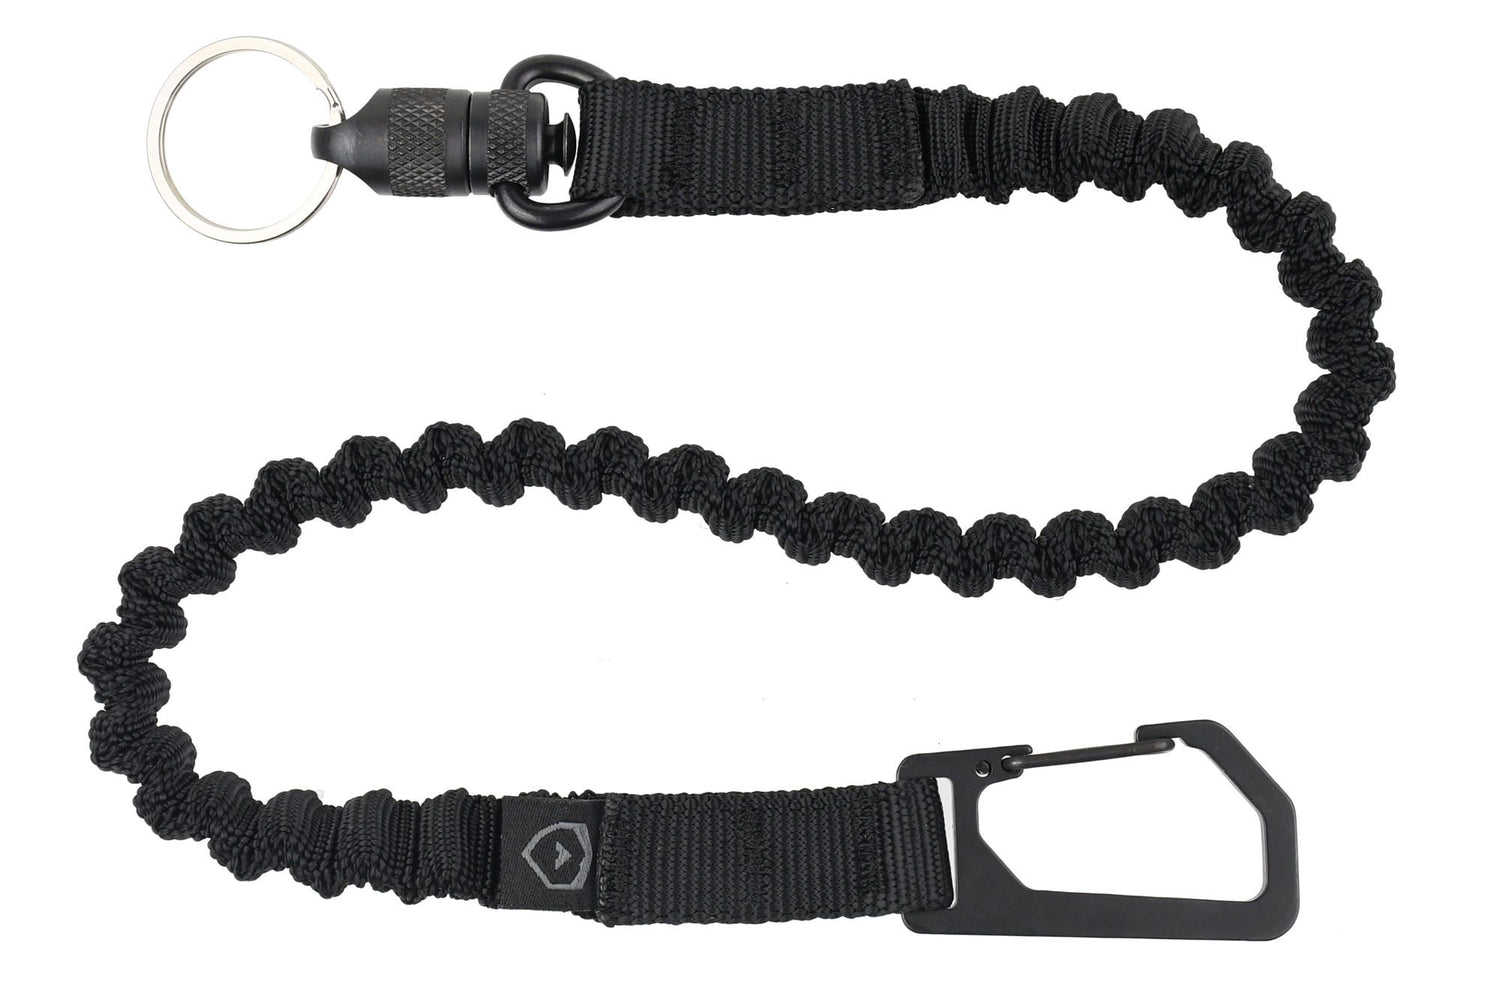 What Is the Best Lanyard?